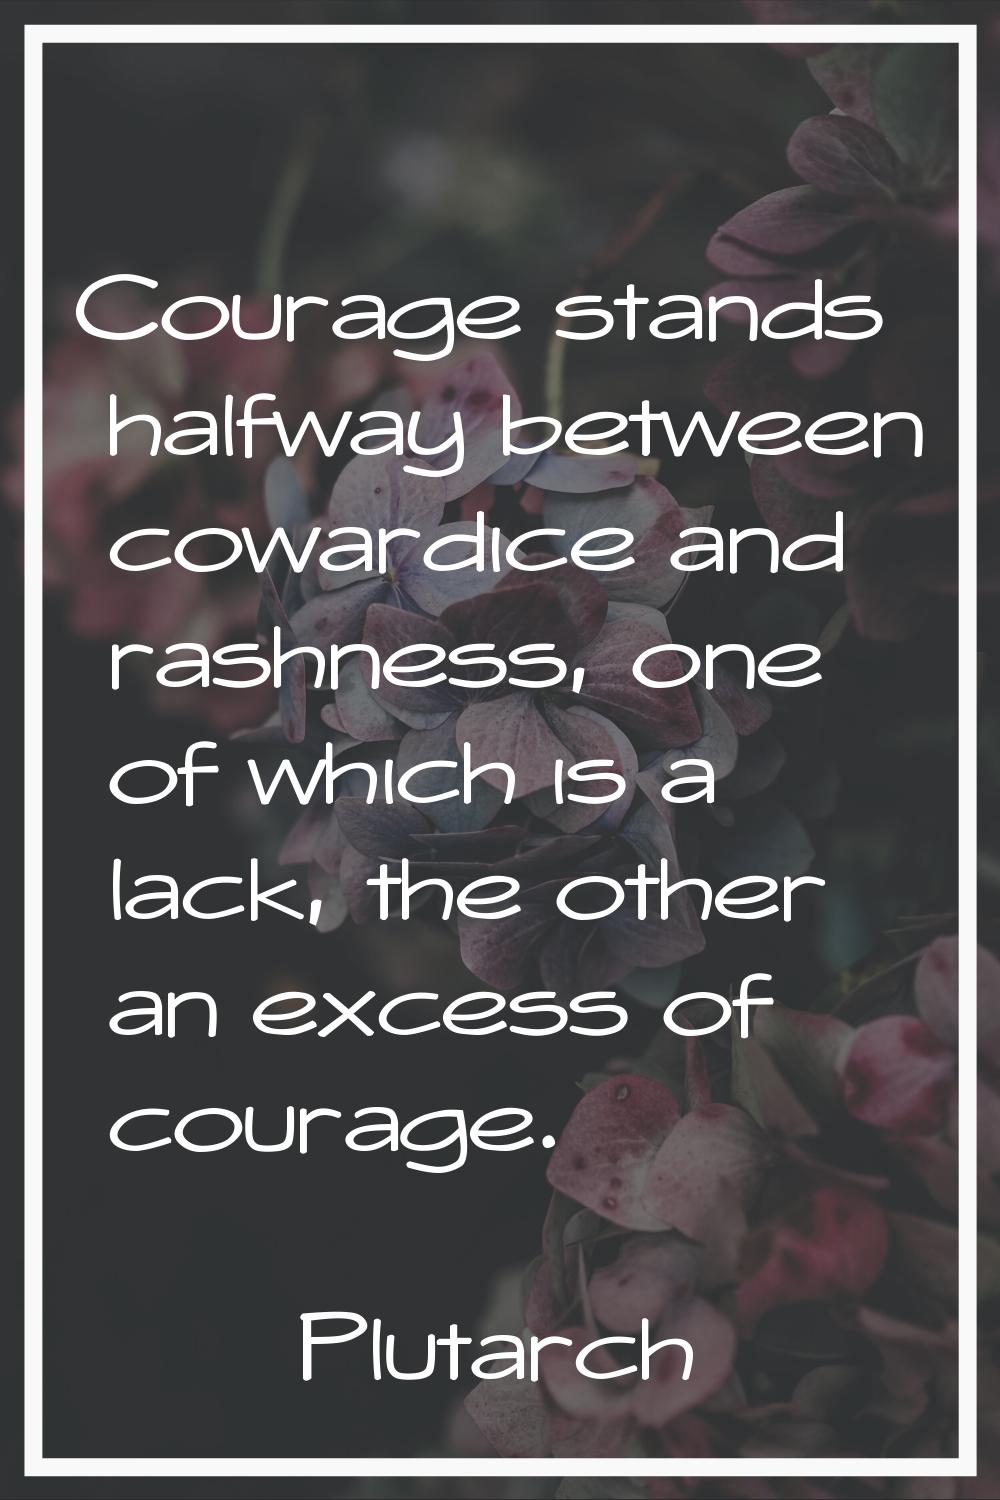 Courage stands halfway between cowardice and rashness, one of which is a lack, the other an excess 